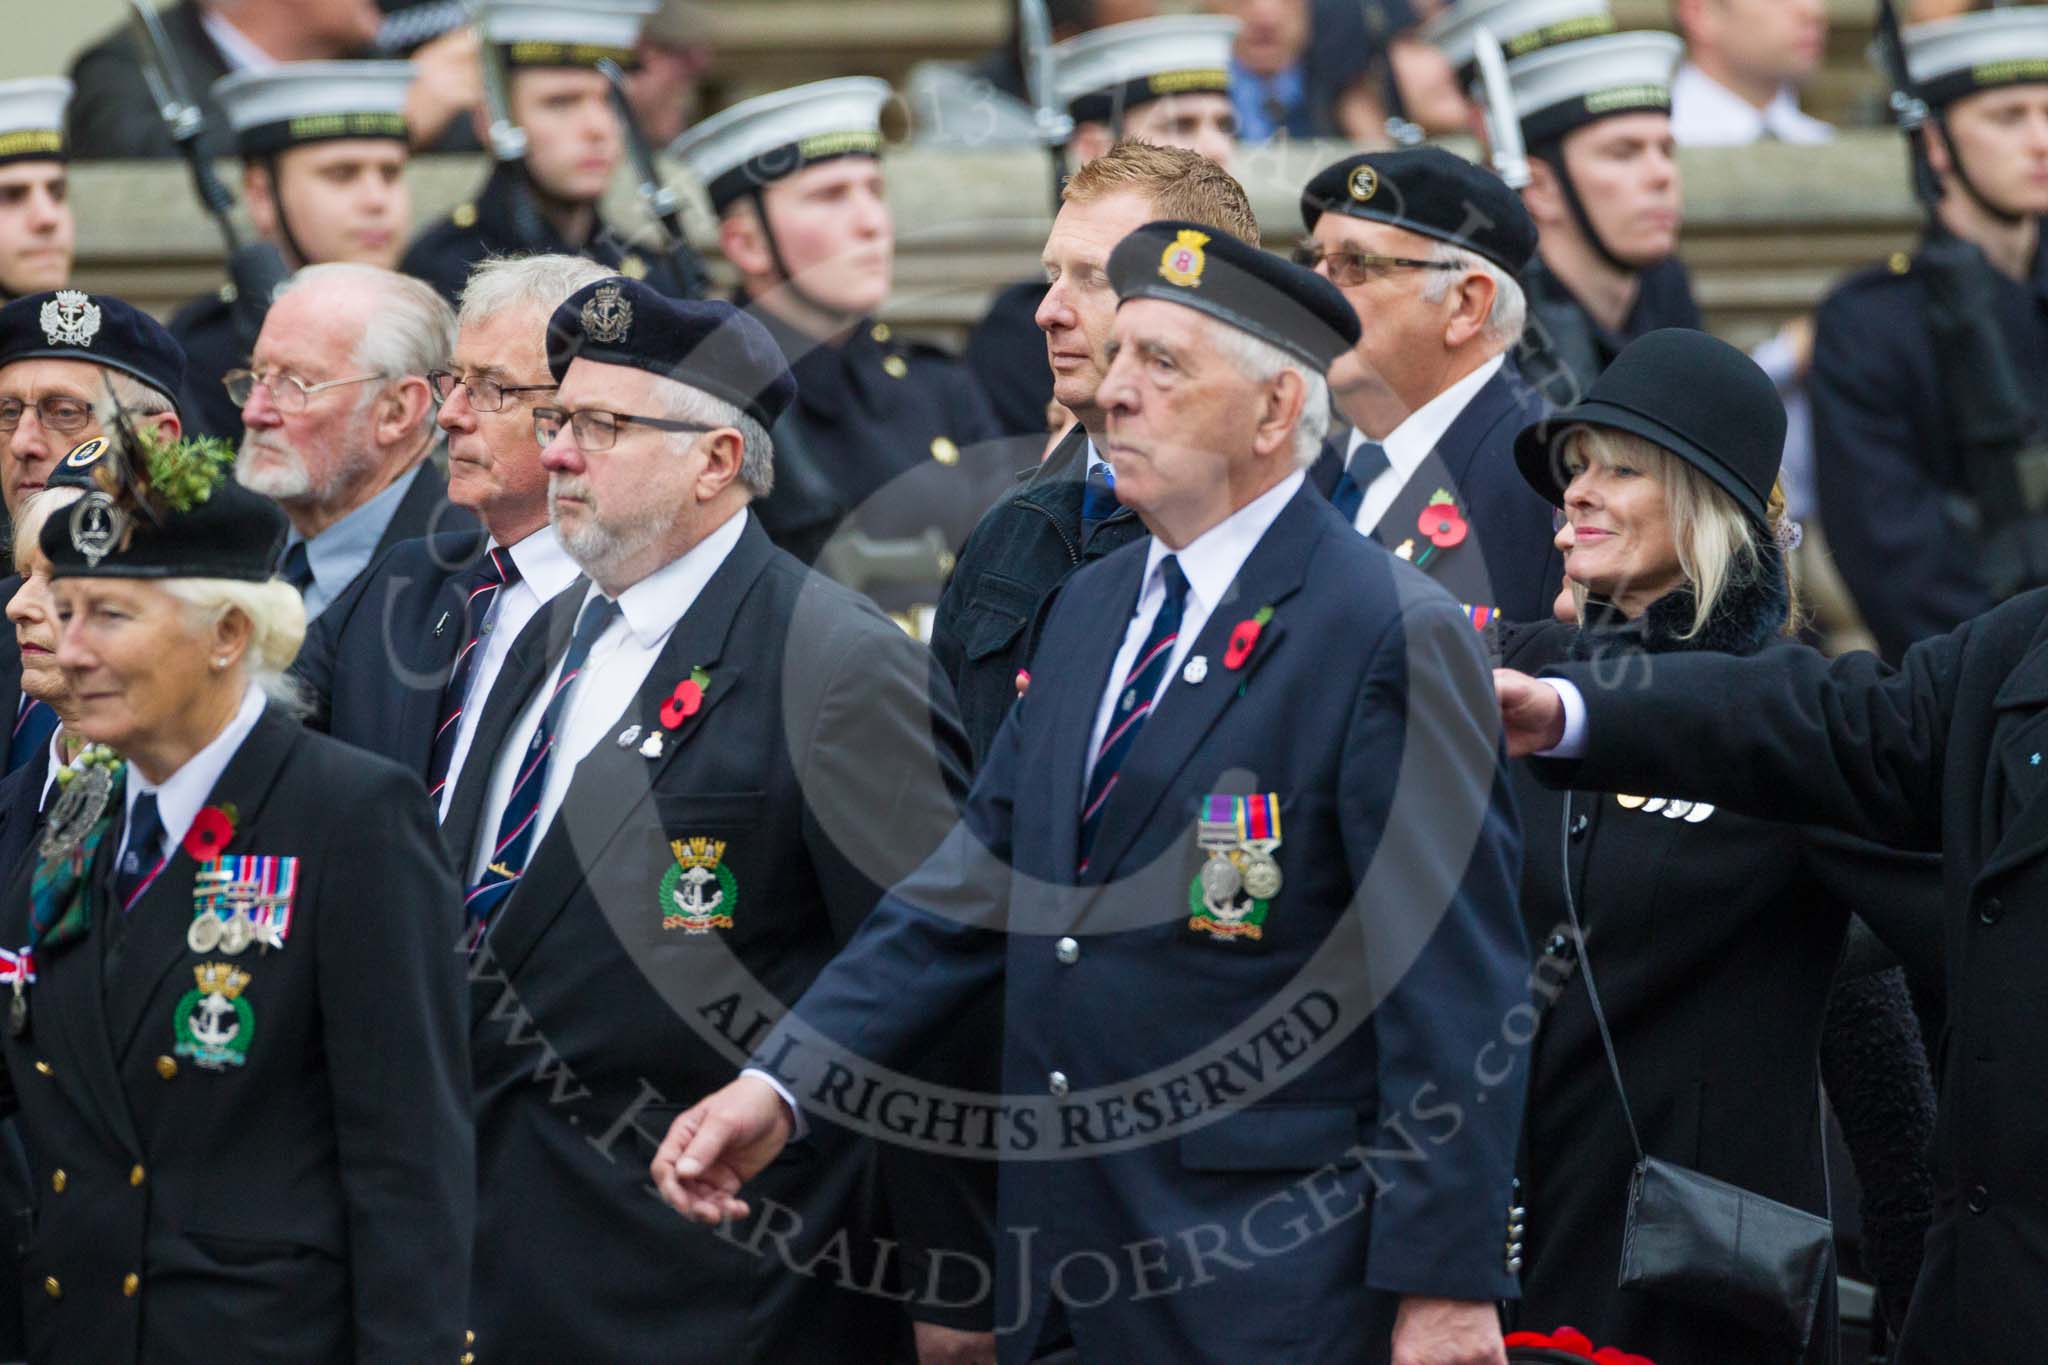 Remembrance Sunday at the Cenotaph 2015: Group E2, Royal Naval Association.
Cenotaph, Whitehall, London SW1,
London,
Greater London,
United Kingdom,
on 08 November 2015 at 11:58, image #807